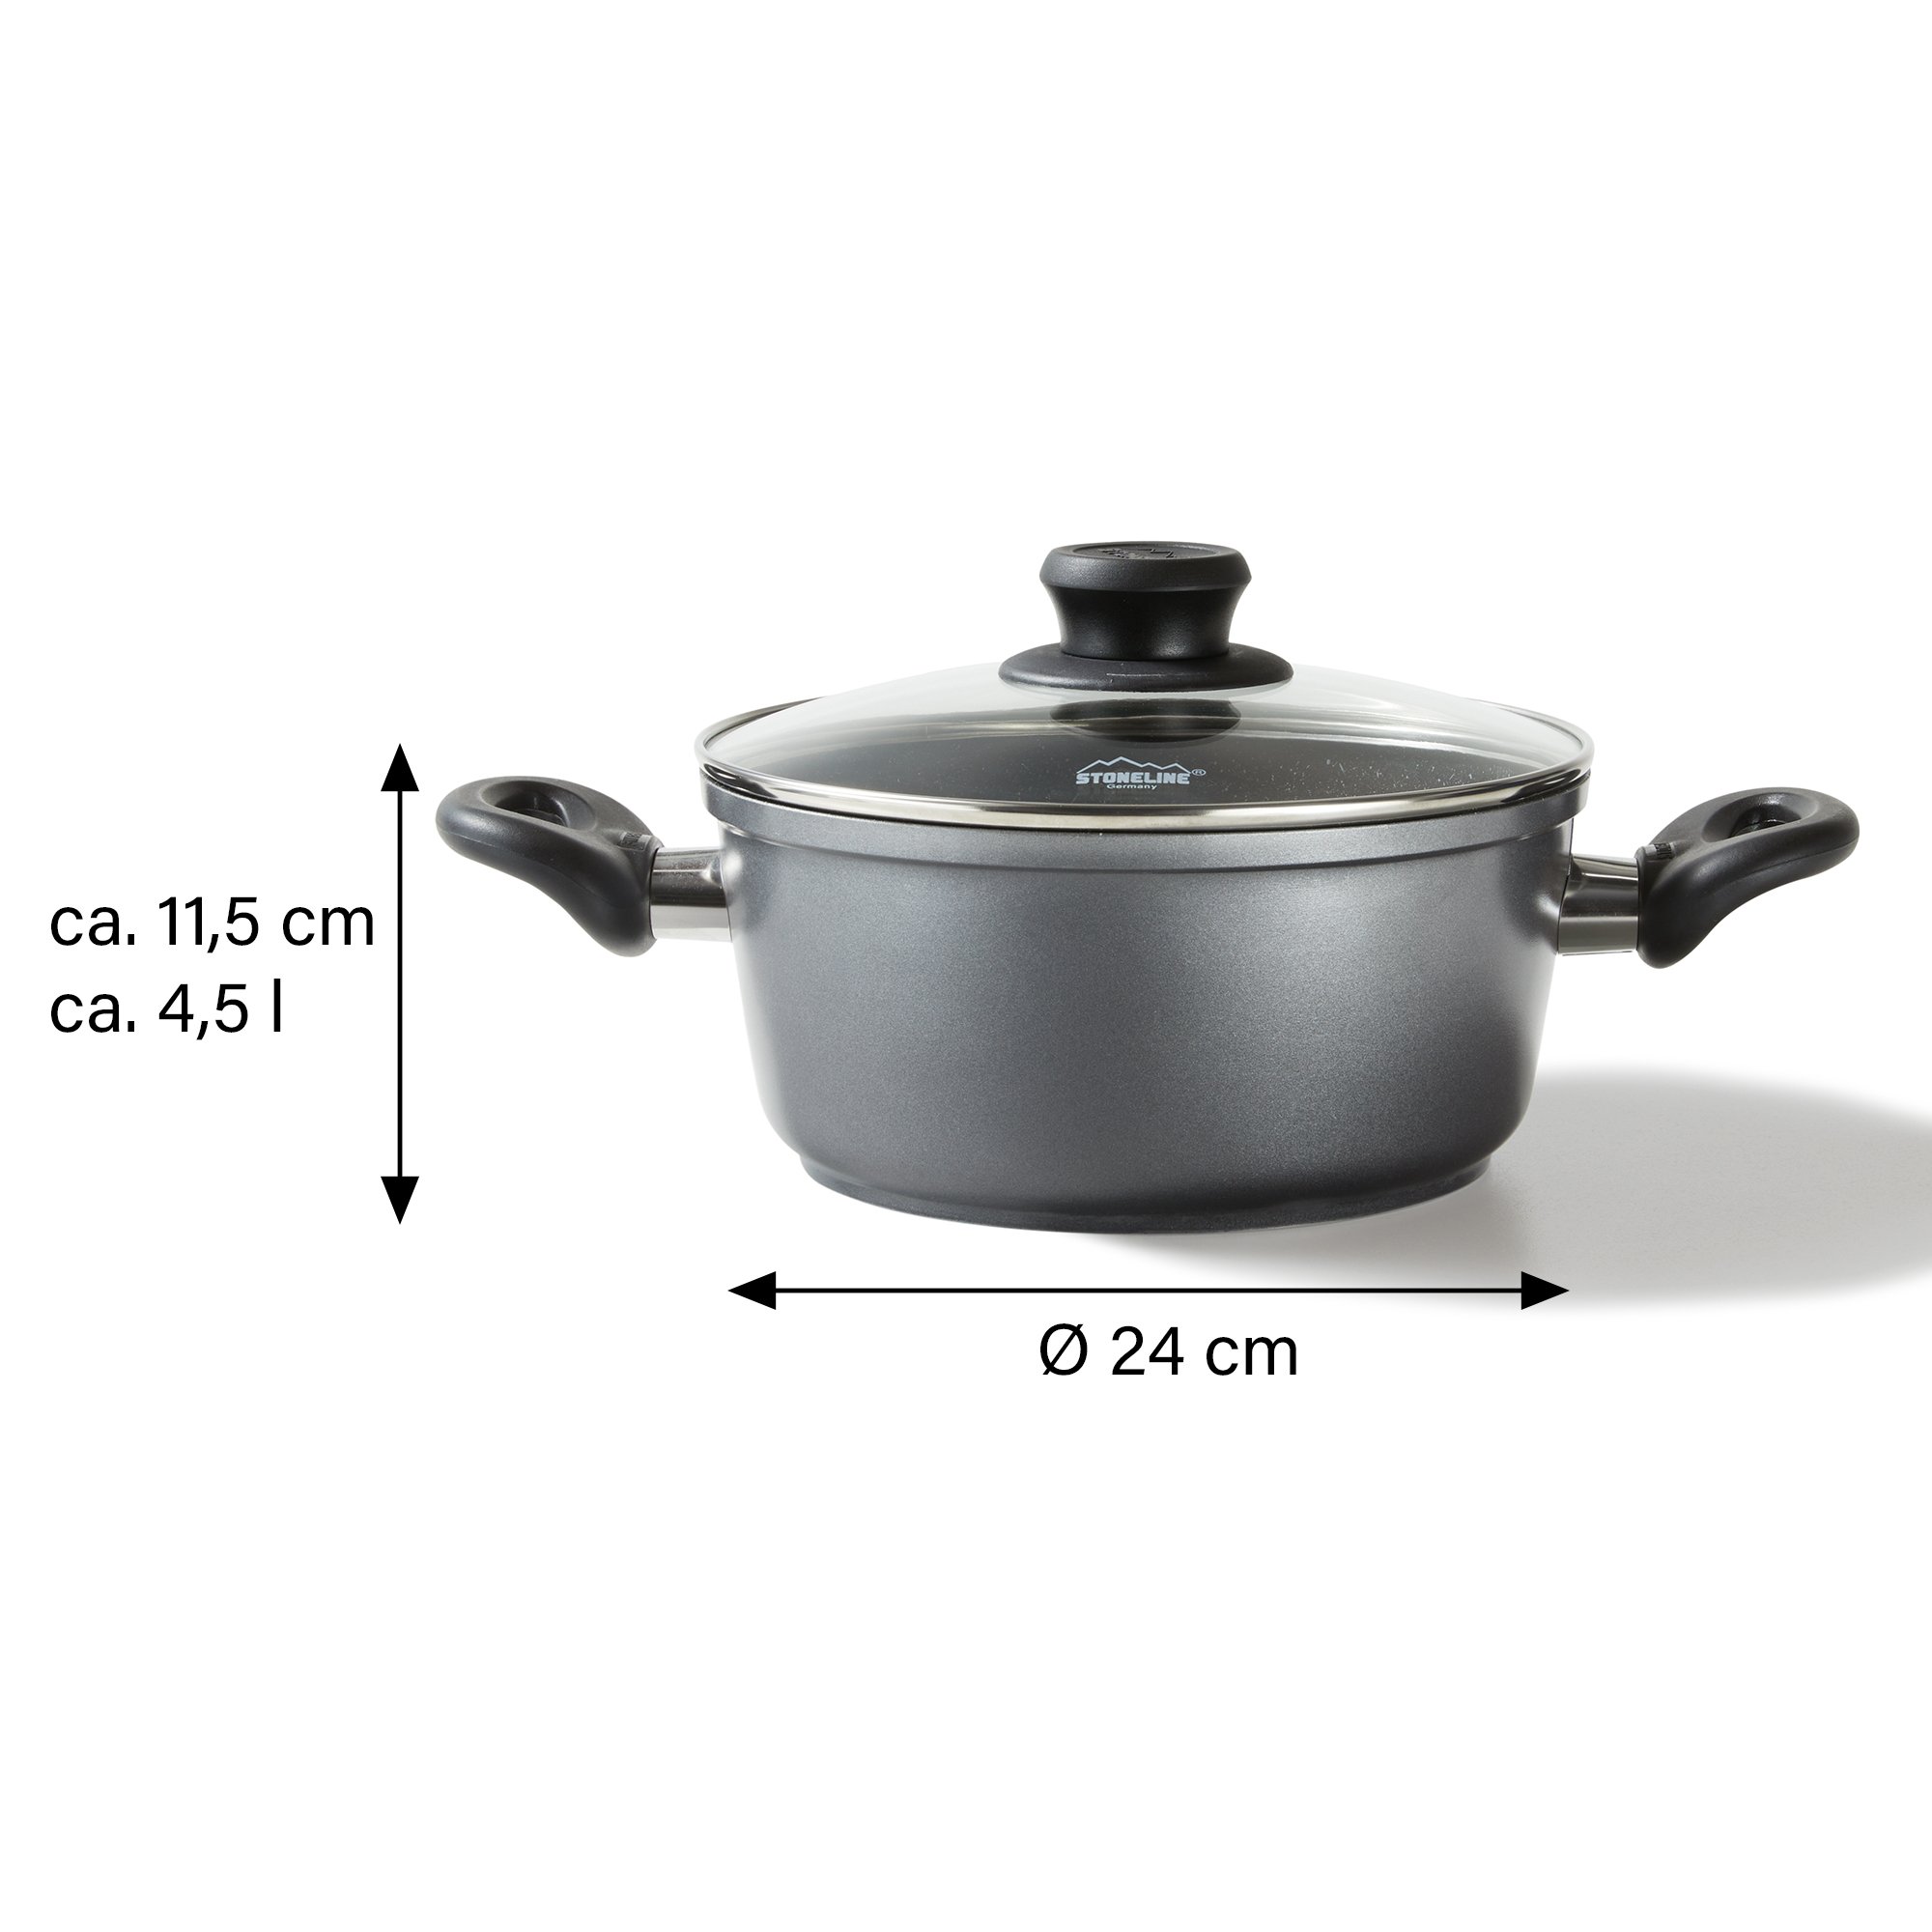 STONELINE® 24cm poêle à frire : Made in Germany, induction, anti